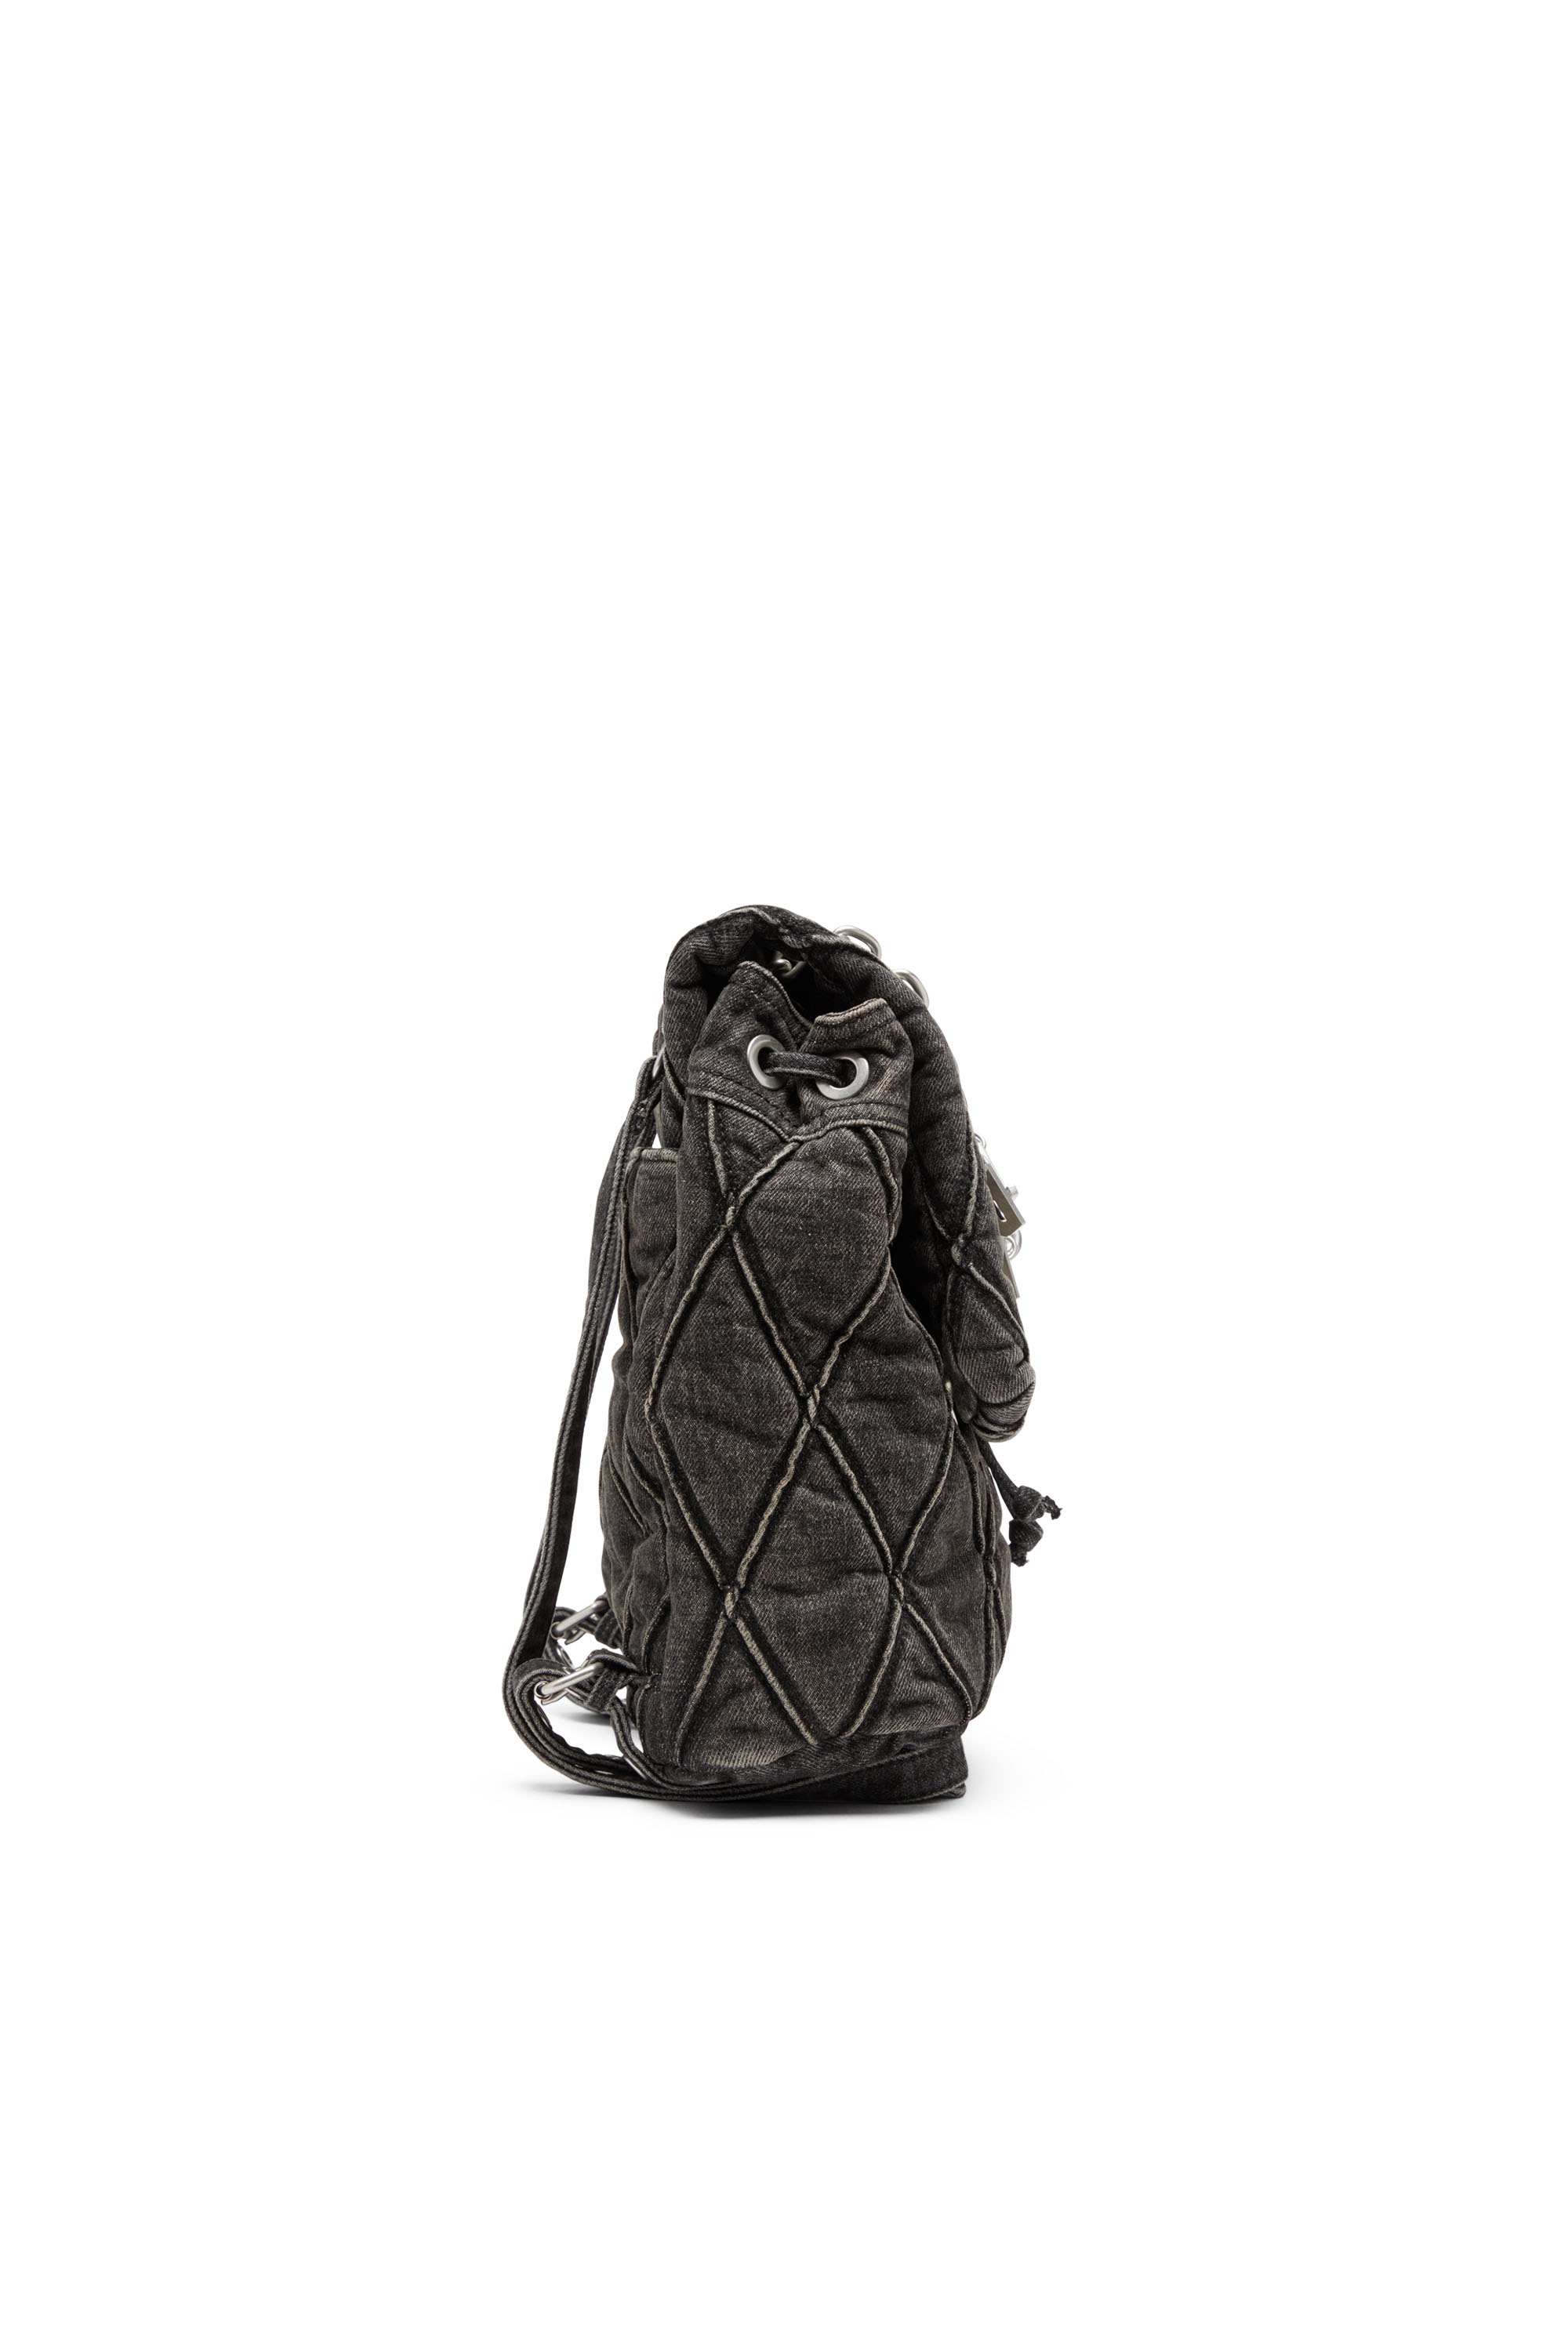 Diesel - CHARM-D BACKPACK S, Woman Charm-D S-Backpack in Argyle quilted denim in Black - Image 3